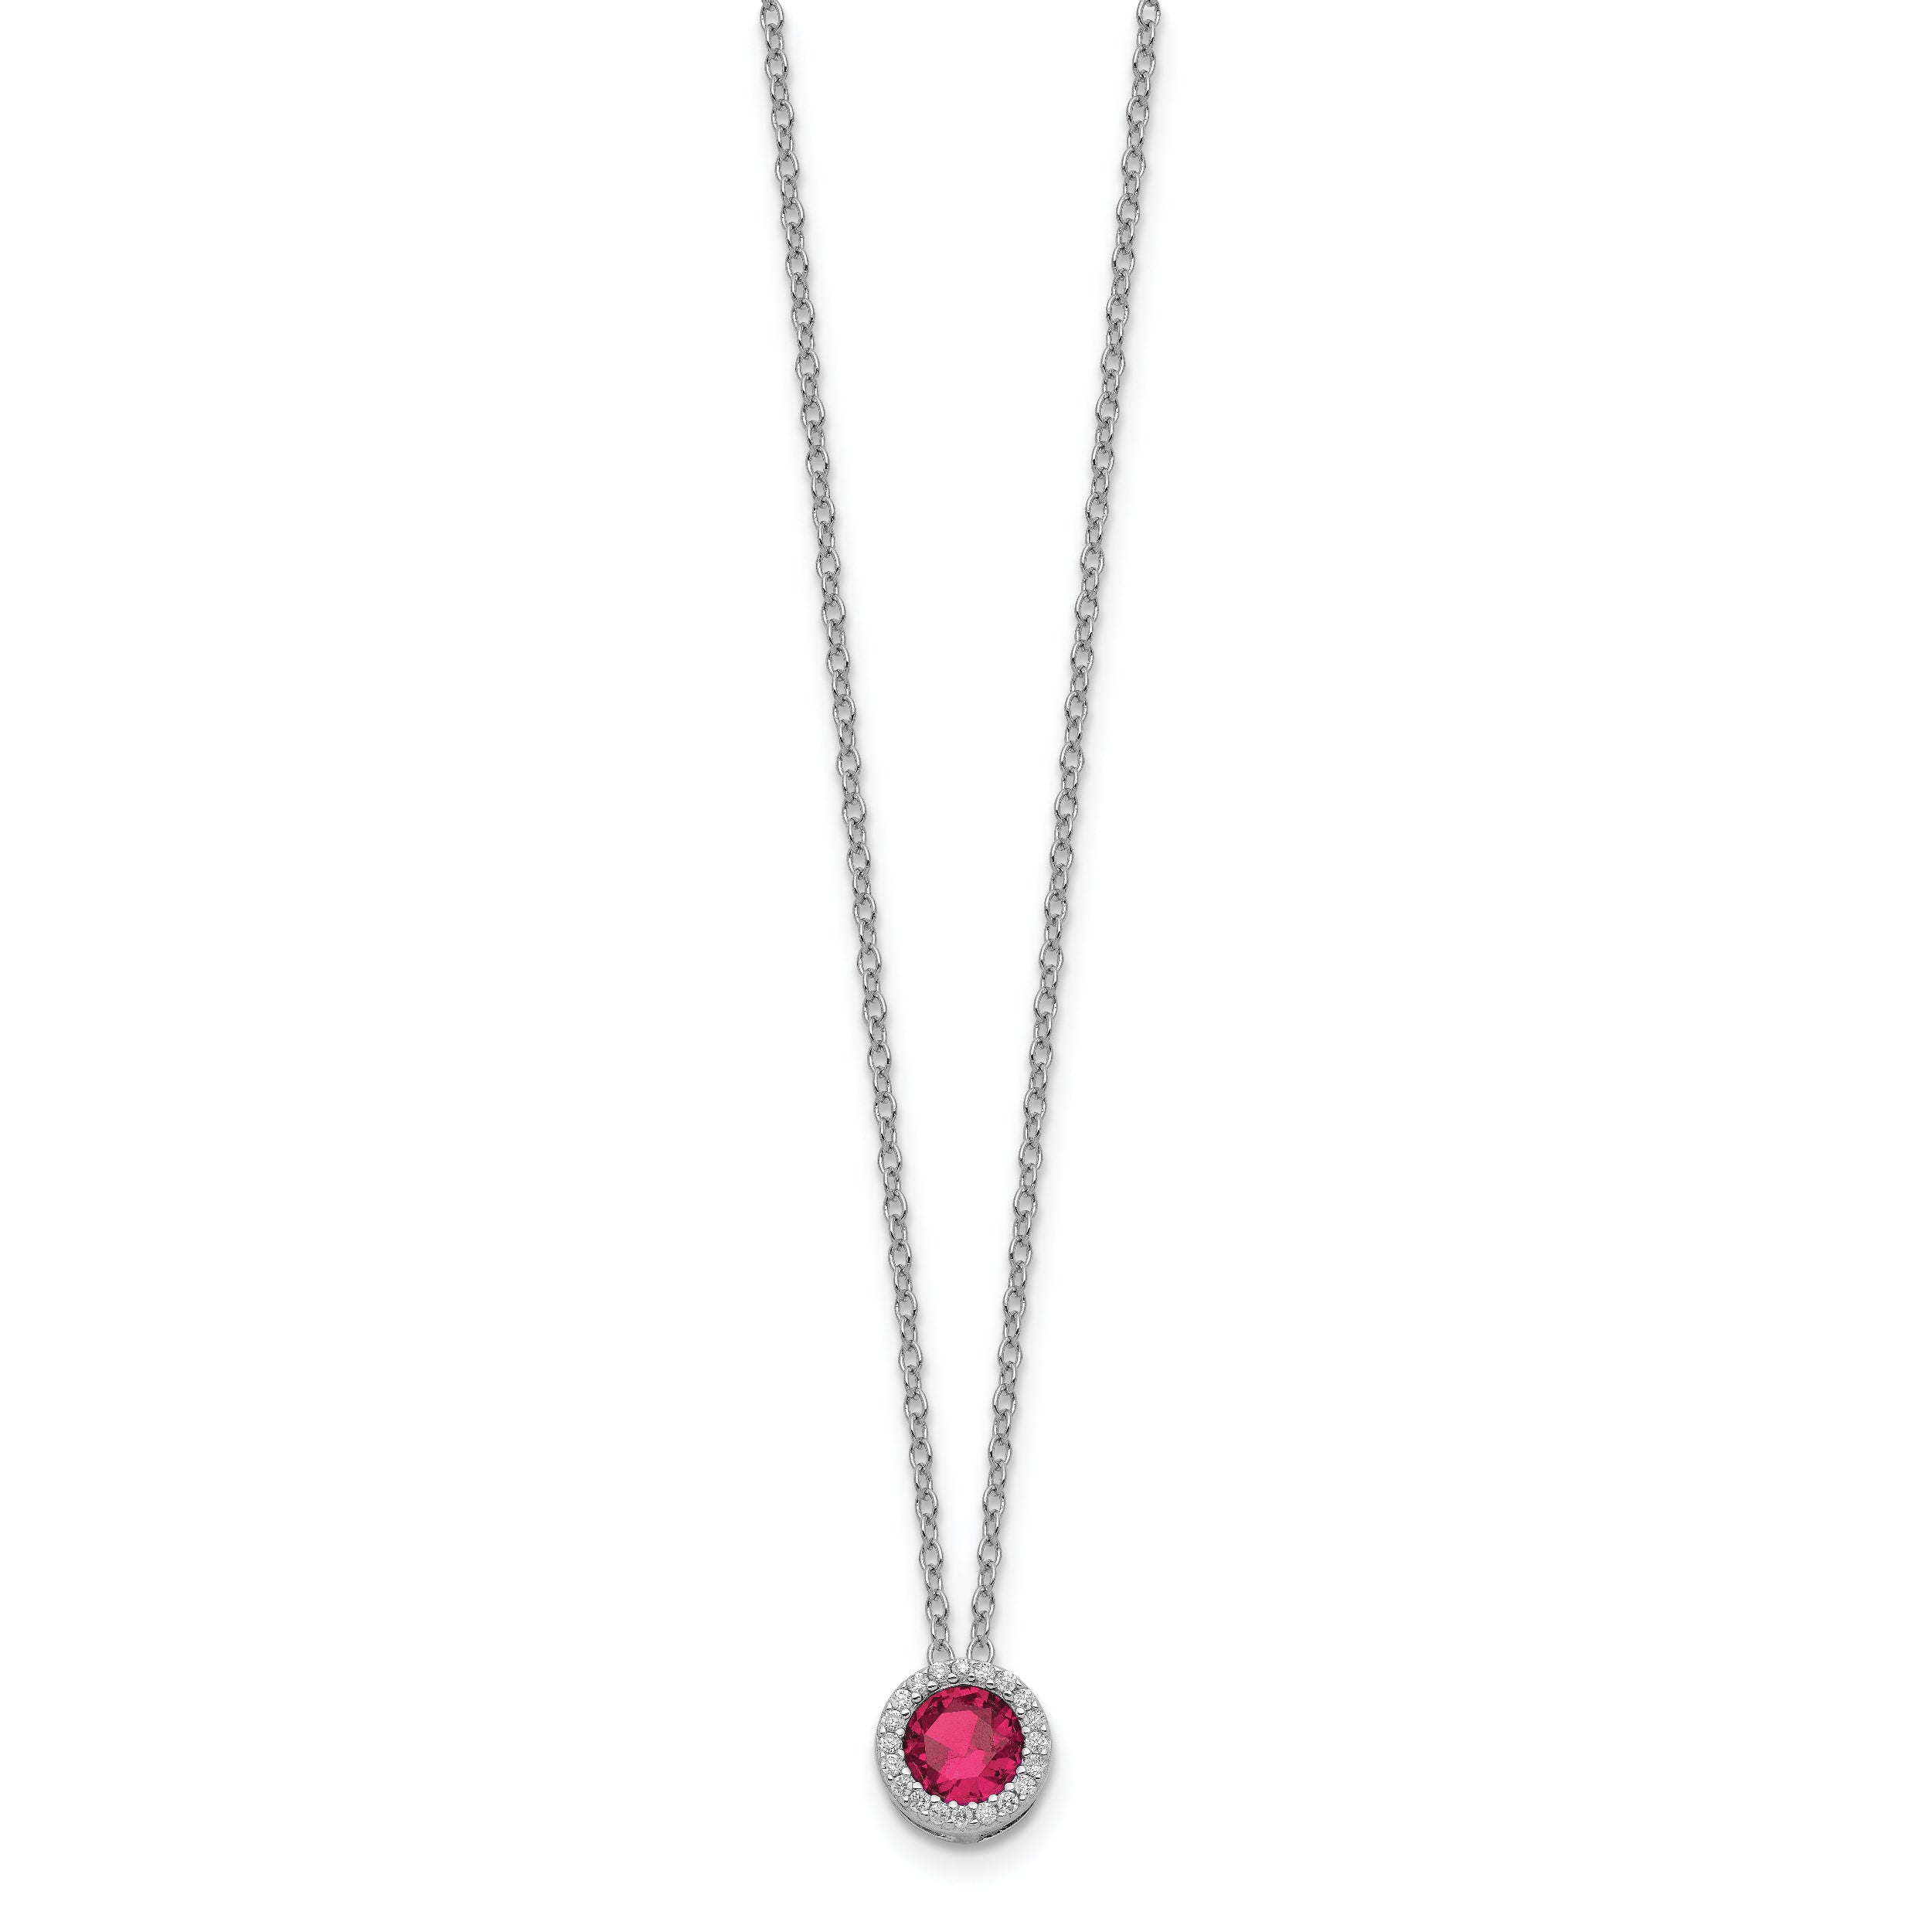 Cheryl M Sterling Silver Rhodium-plated Brilliant-cut Lab Created Ruby and Brilliant-cut White CZ Round Halo 18 Inch Necklace